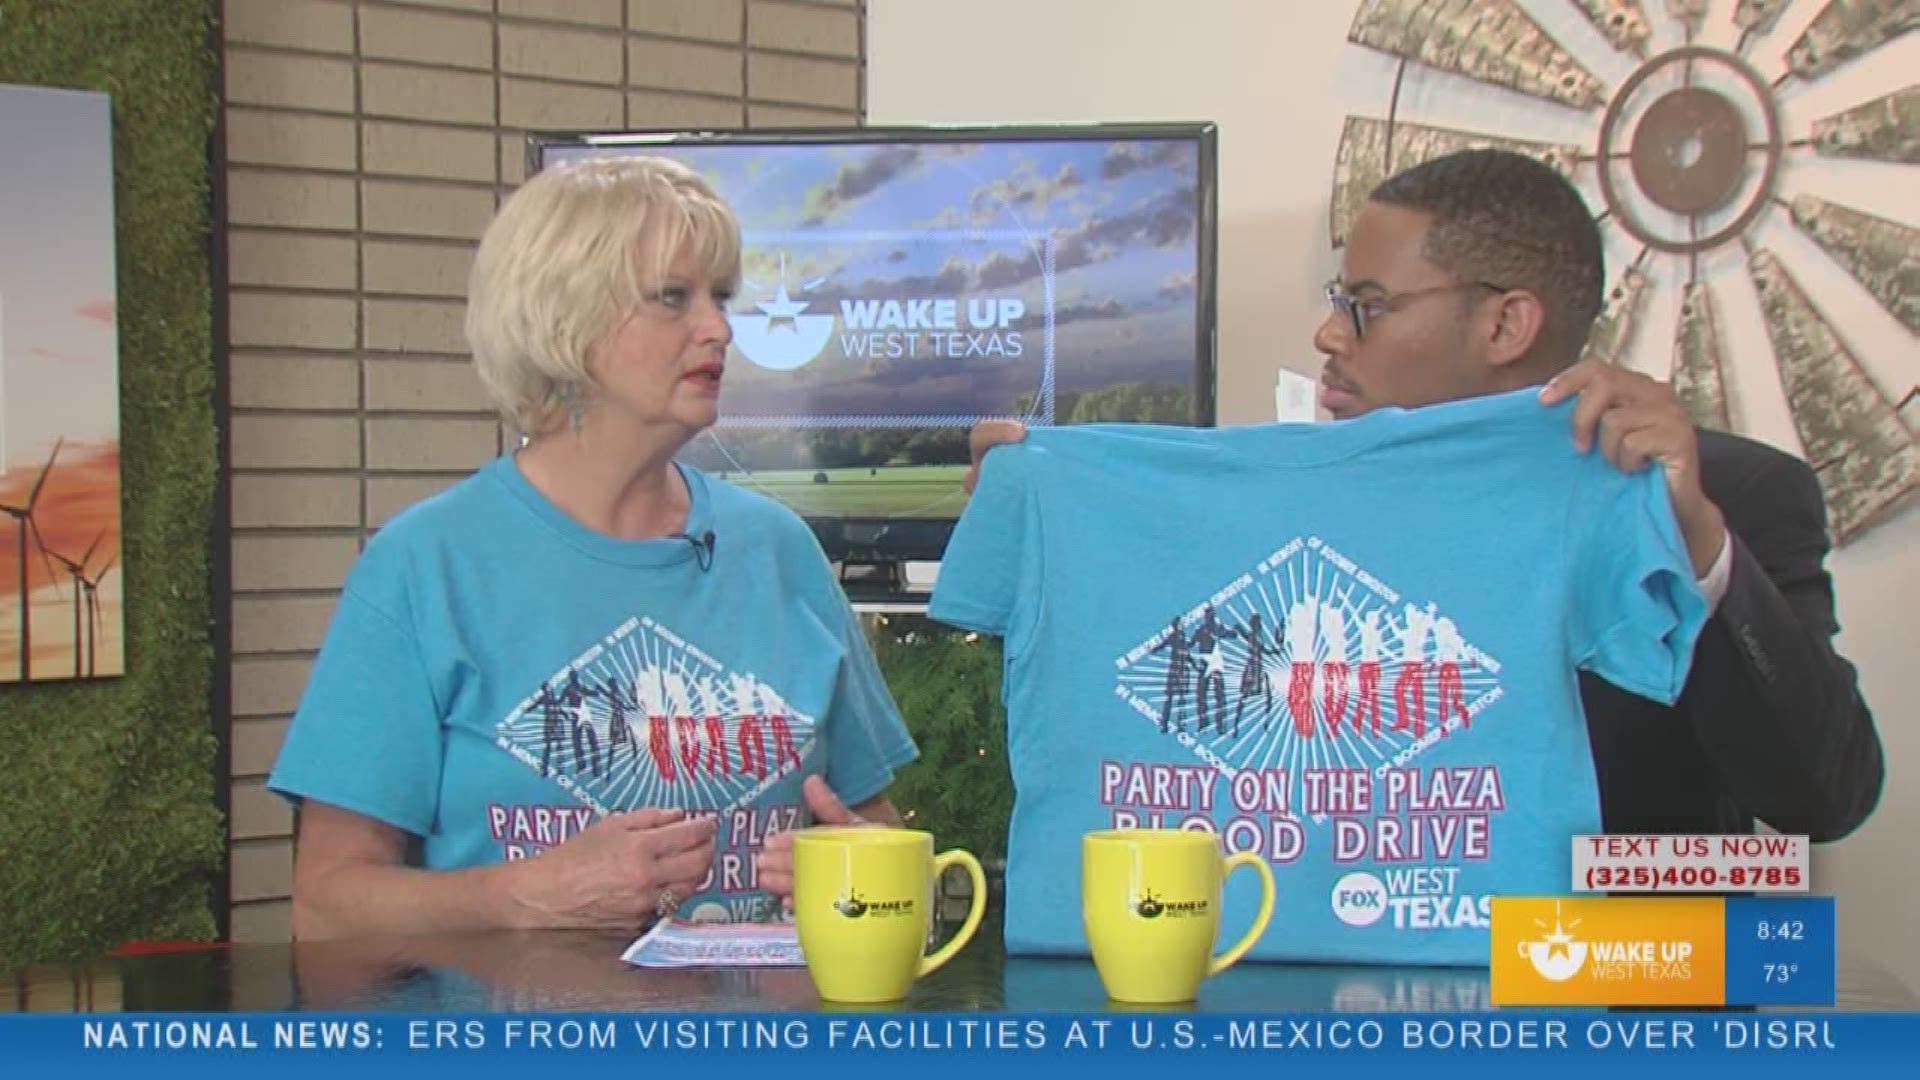 Our Malik Mingo spoke with the donor recruitment supervisor about the Party on the Plaza blood drive on August 30 from 8 am-noon at the FOX West Texas studios.